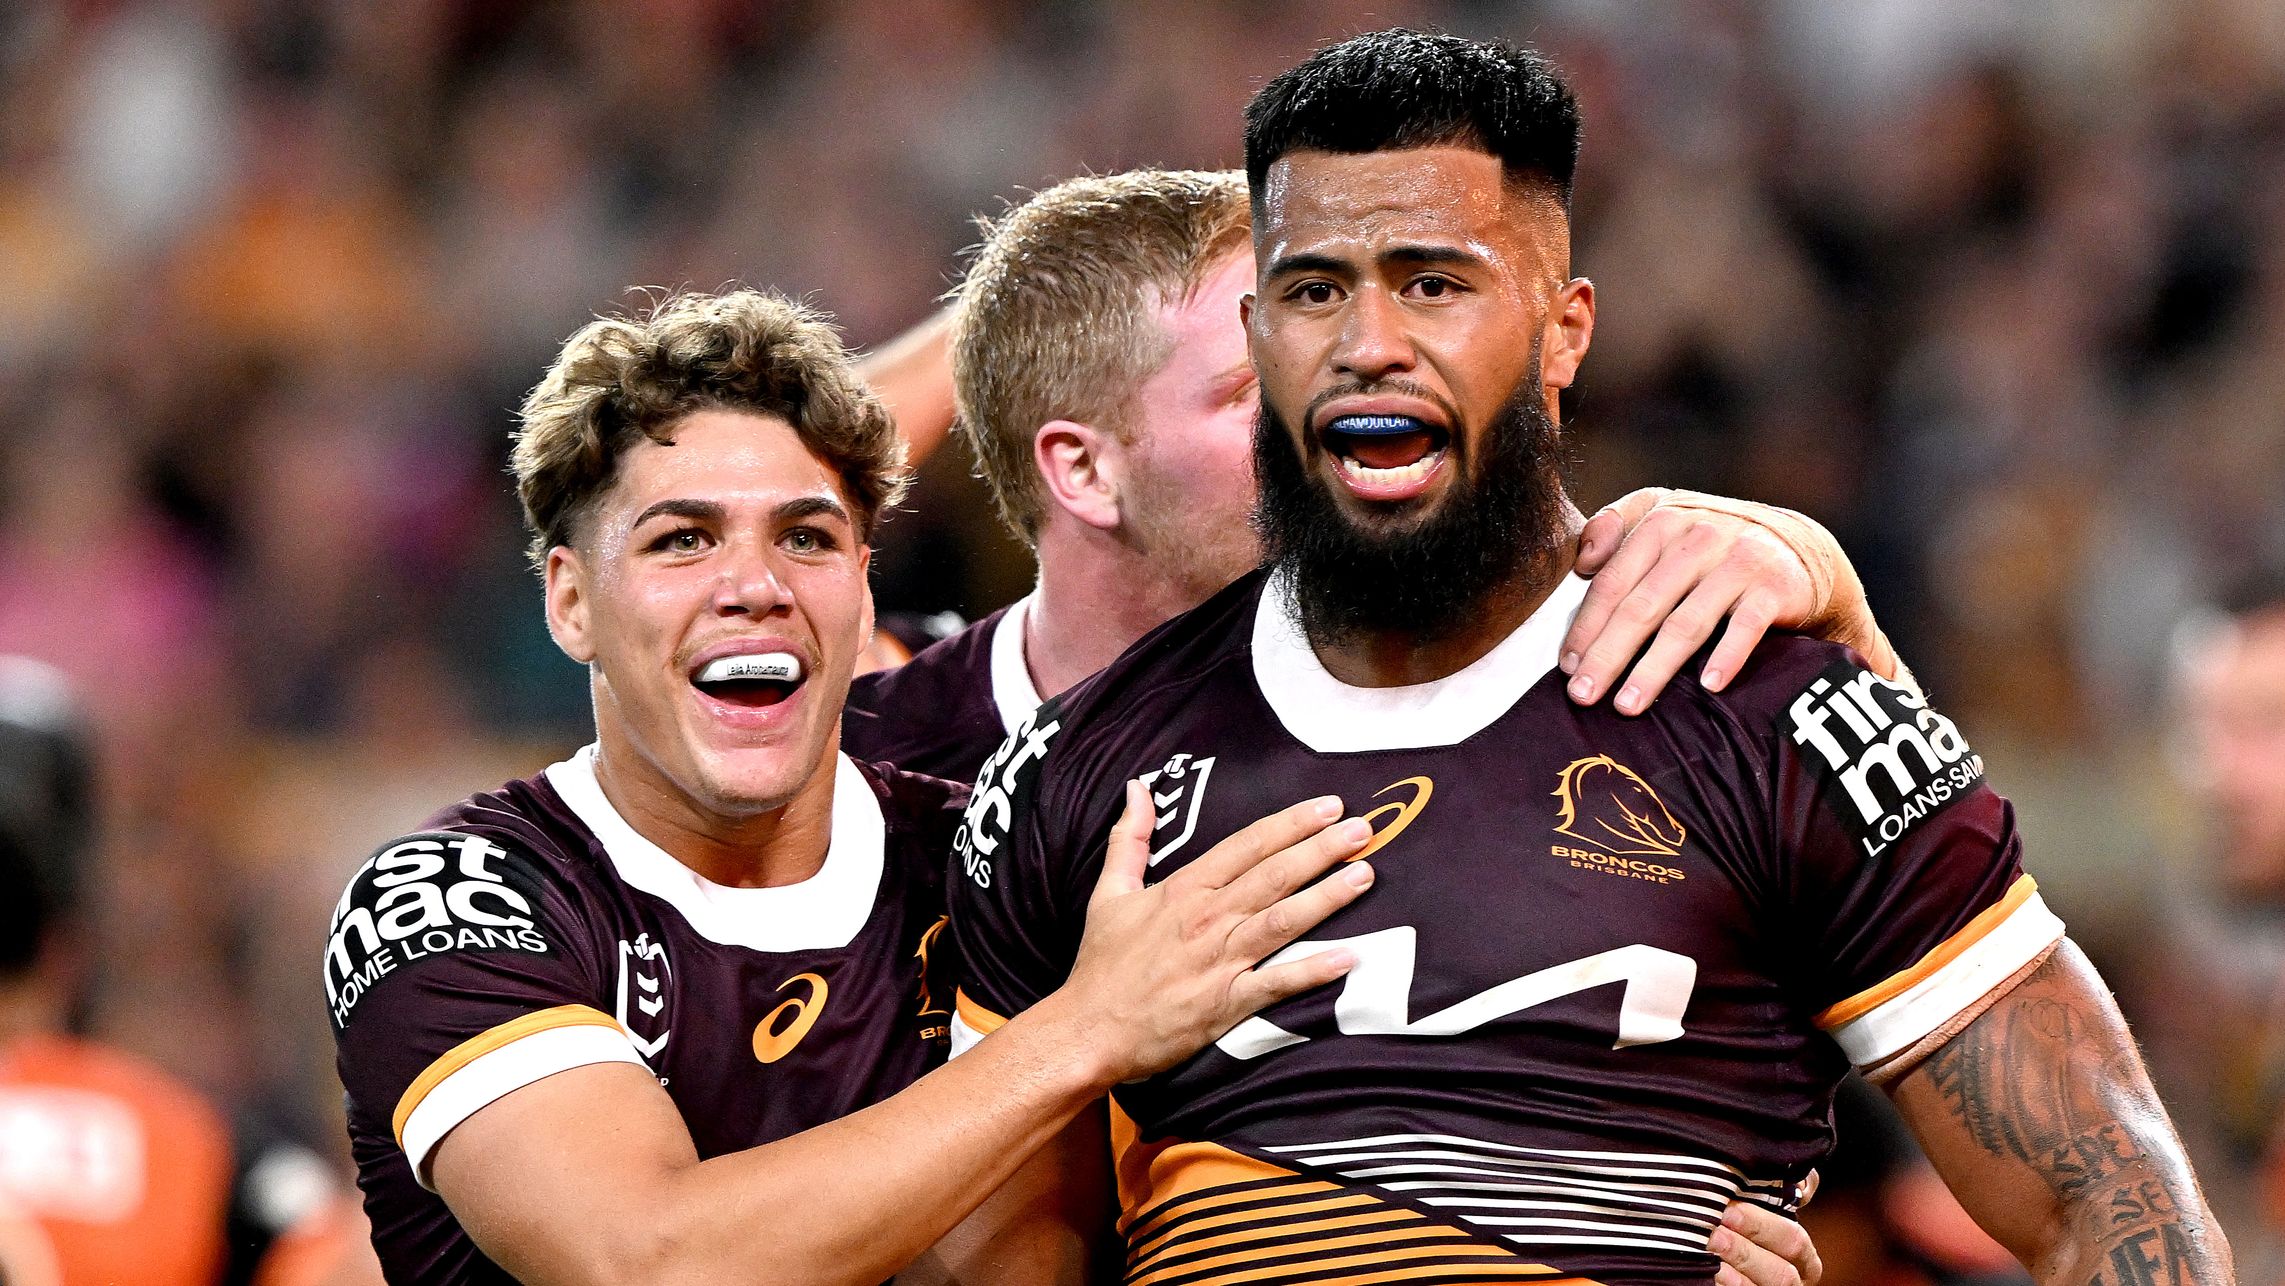 BRISBANE, AUSTRALIA - APRIL 01: Payne Haas of the Broncos celebrates scoring a try during the round five NRL match between Brisbane Broncos and Wests Tigers at Suncorp Stadium on April 01, 2023 in Brisbane, Australia. (Photo by Bradley Kanaris/Getty Images)